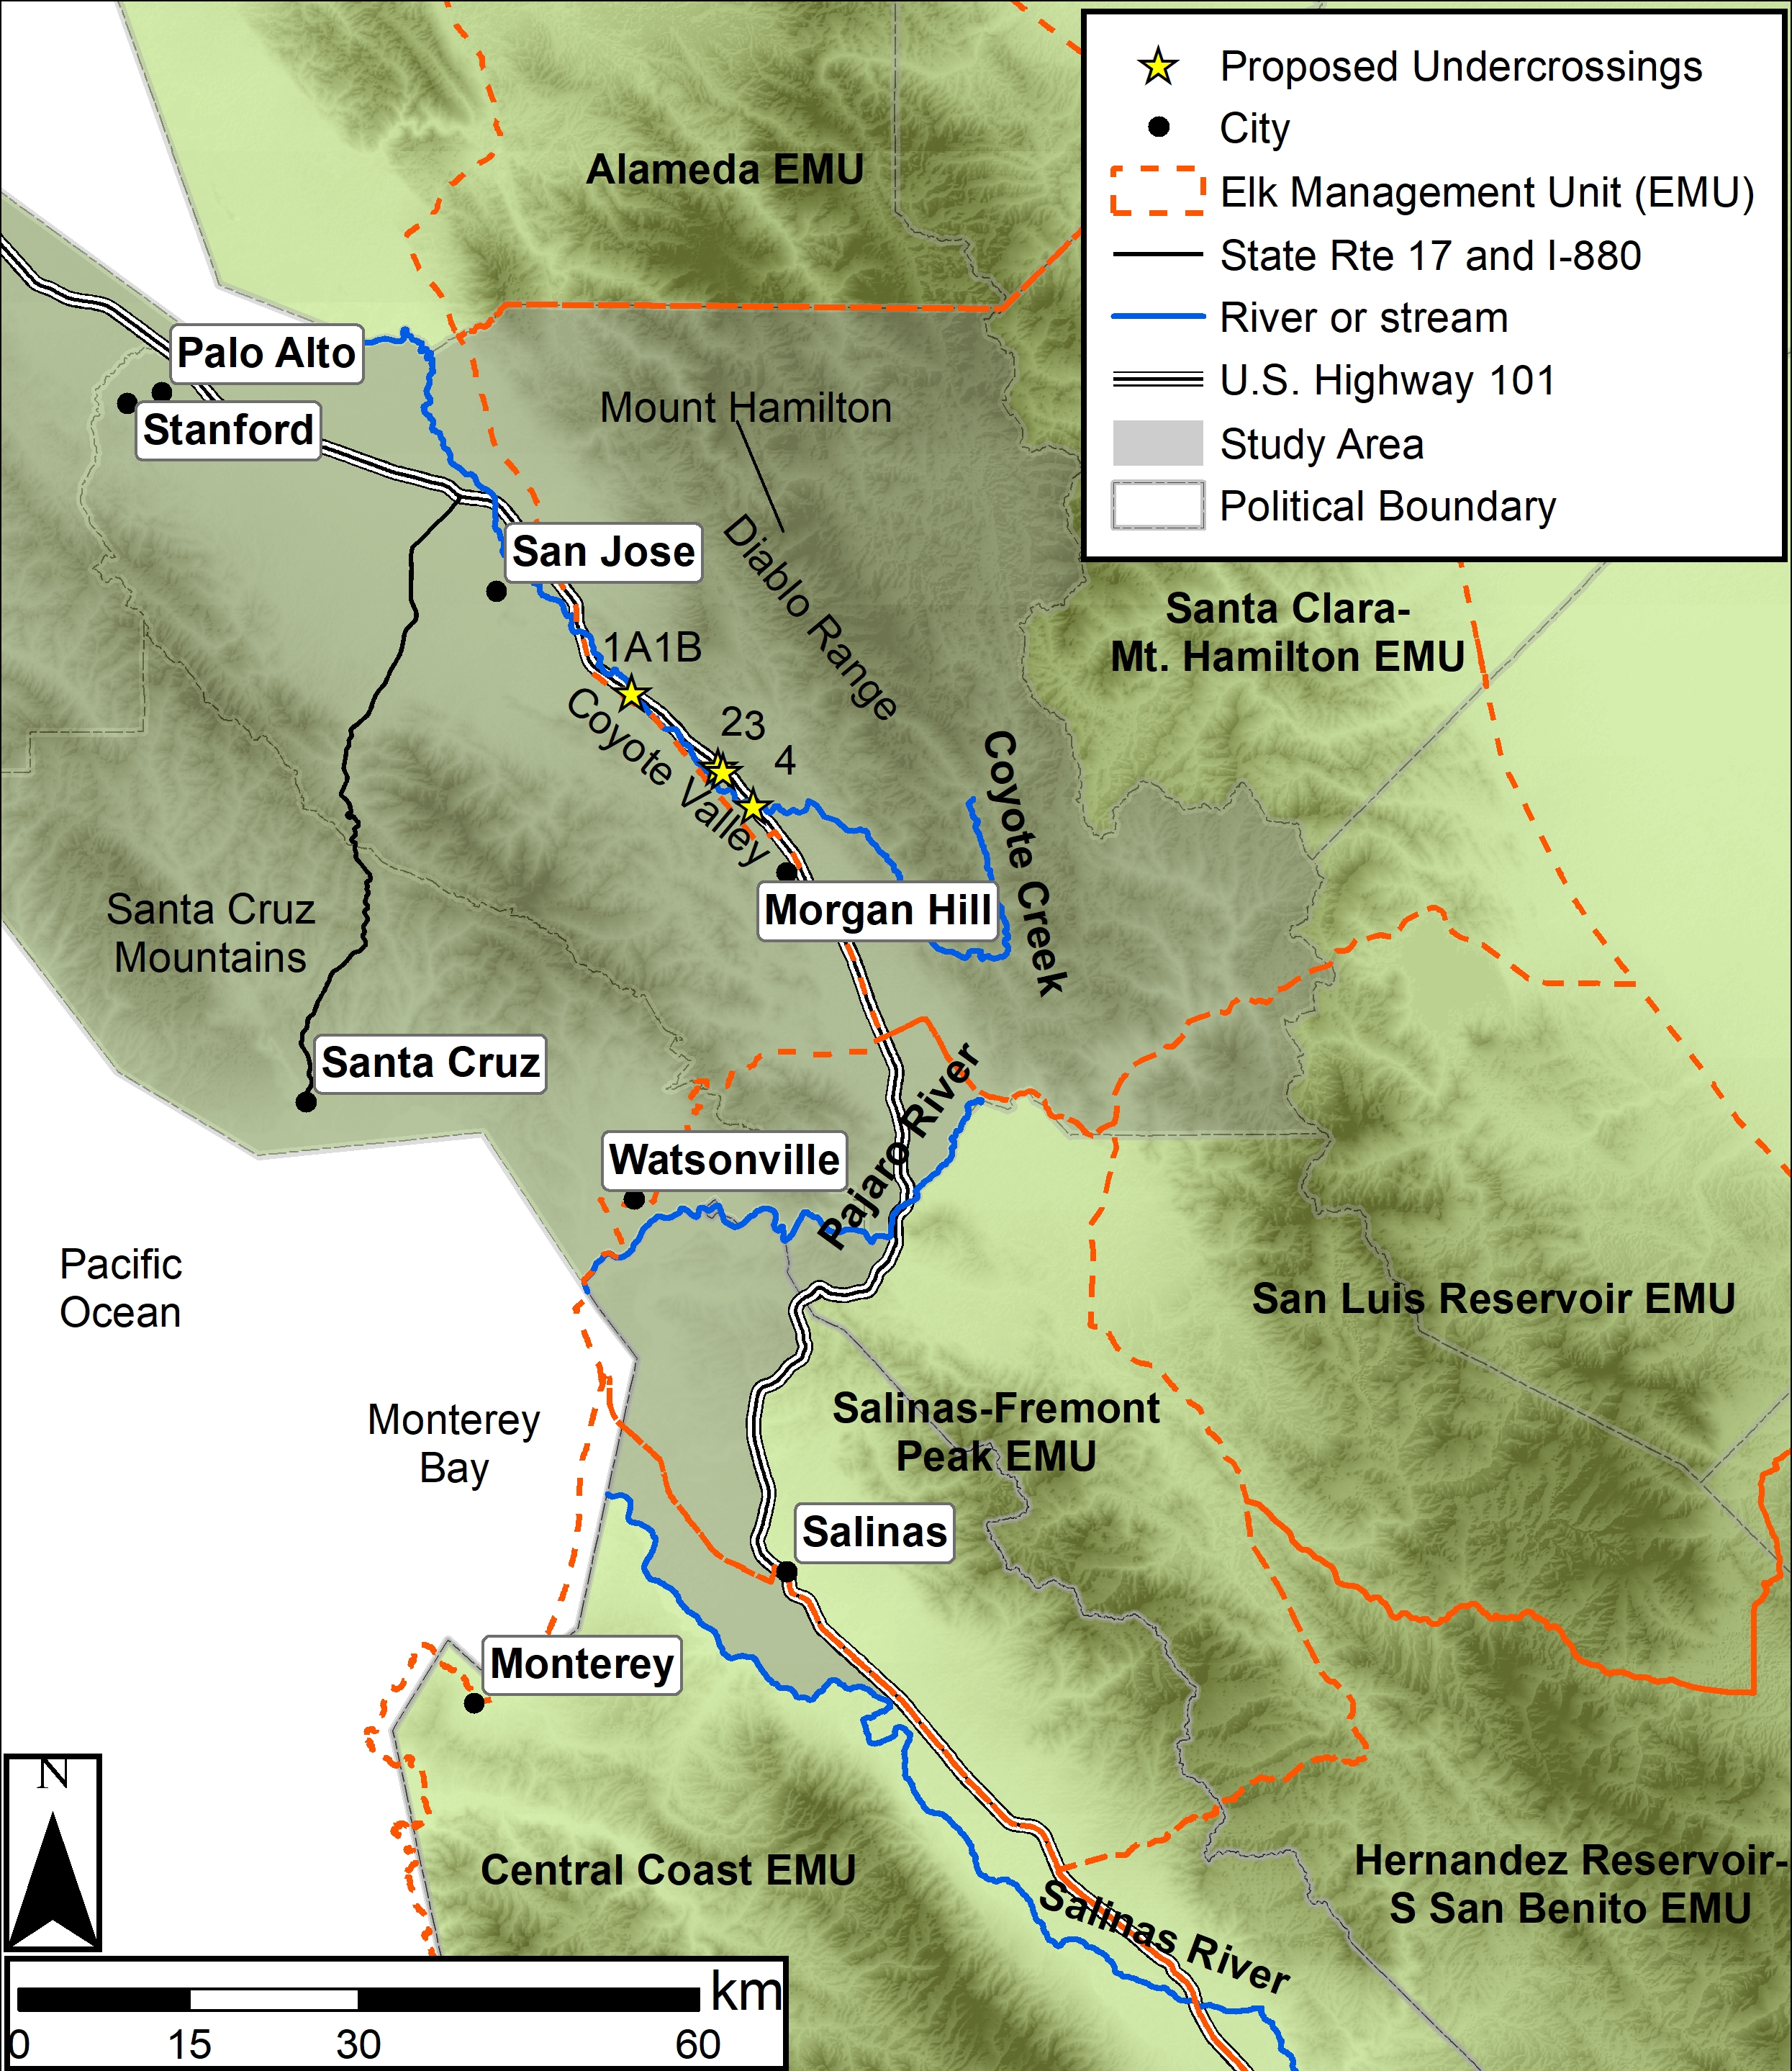 Figure 3. Map showing U.S. Highway 101 bisecting Coyote Valley, the narrowest gap between the foothills of Mt. Hamilton in the Diablo Range and the Santa Cruz Mountains. Undercrossings which could be modified to enable elk passage are 1A and 1B = Northwest Coyote Creek, 2 = Golf Cart Utility, 3 = Coyote Creek Golf Drive, 4 = Southeast Coyote Creek. Green shading displays topographic relief, with lighter shading indicating lower elevations and darker shading indicating higher elevations.